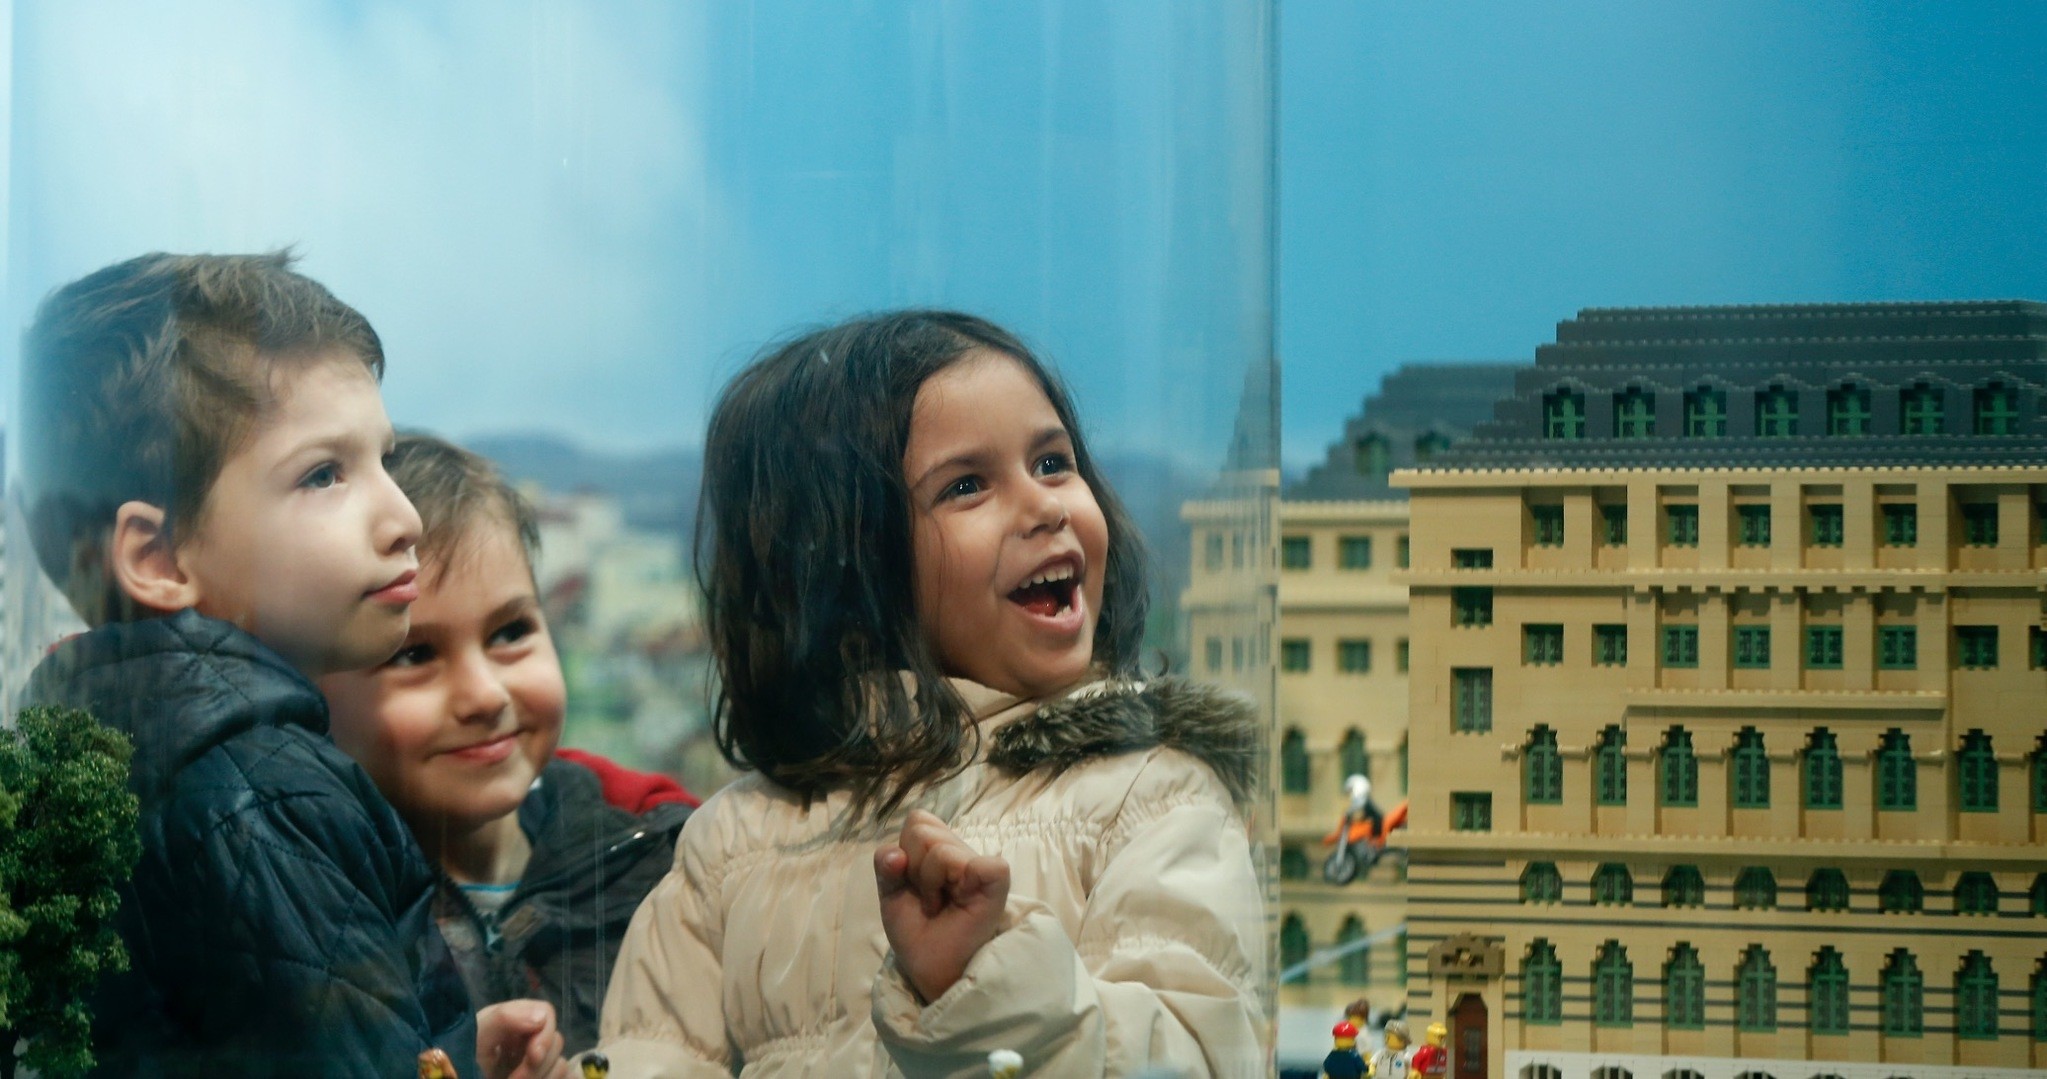 Children spend great time discovering Legoland in Istanbul.